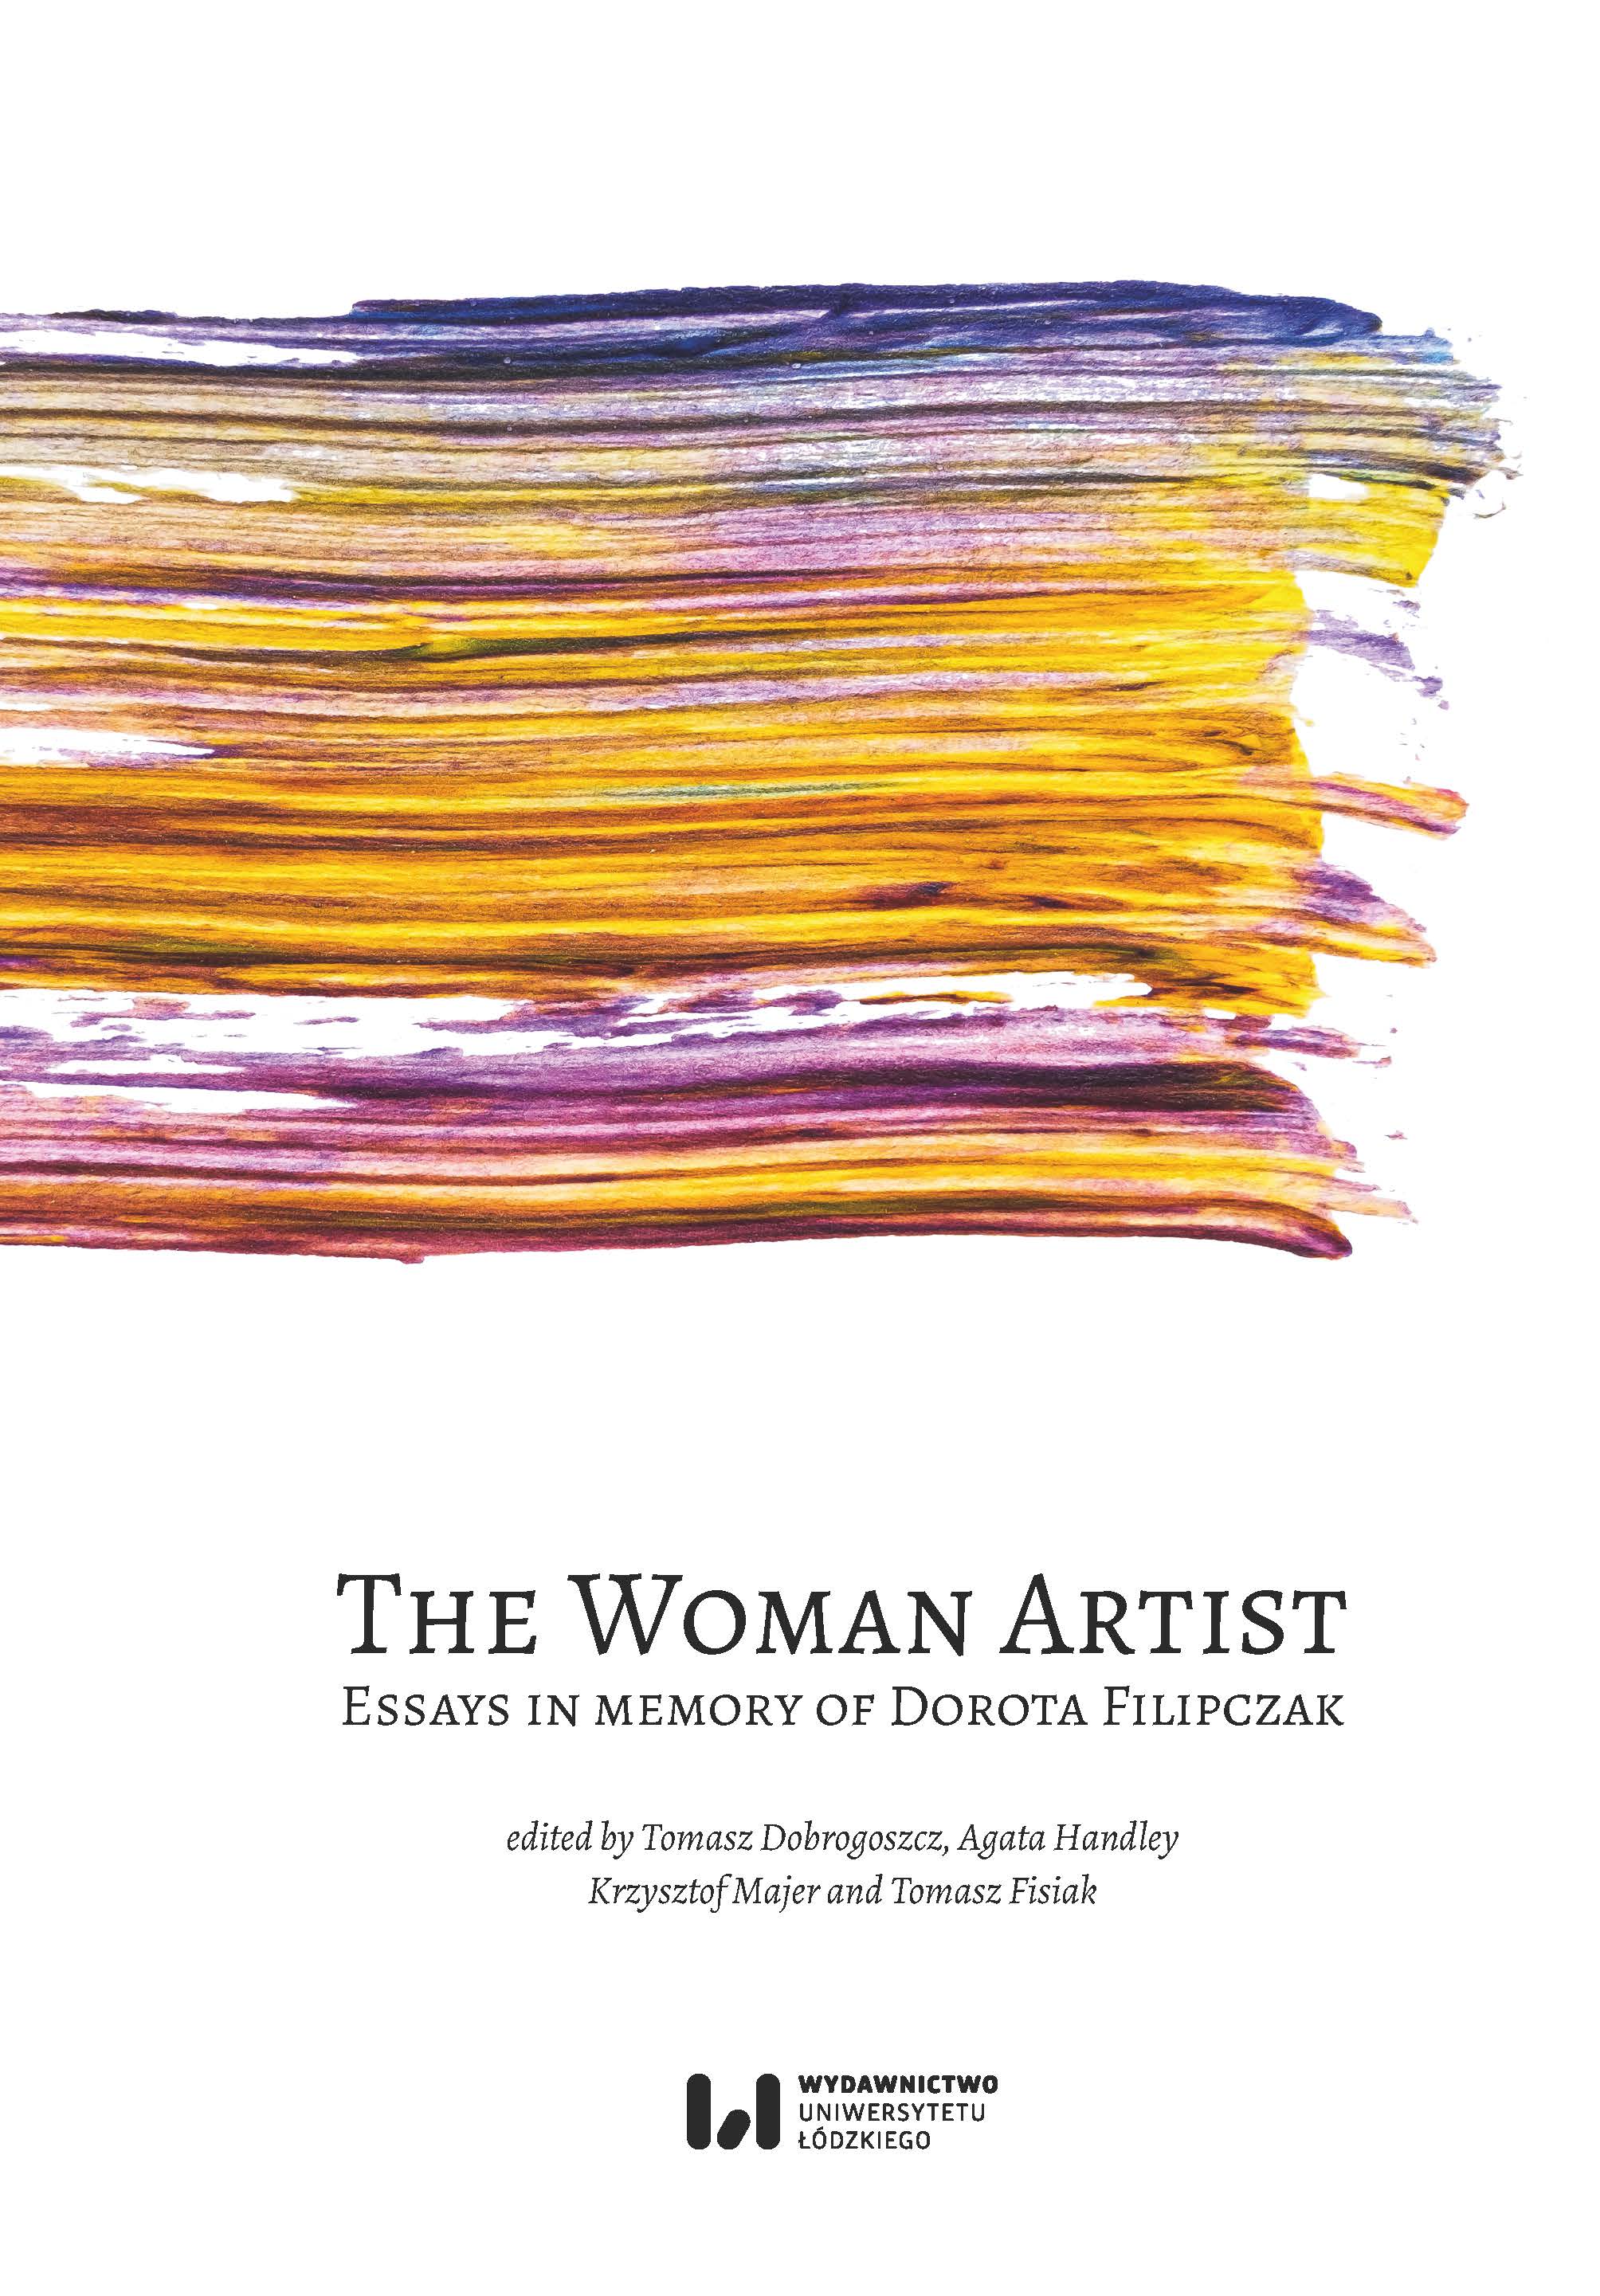 Aesthetic Modes of Attack: The Woman Critic-Artist, Caractère unique Cover Image